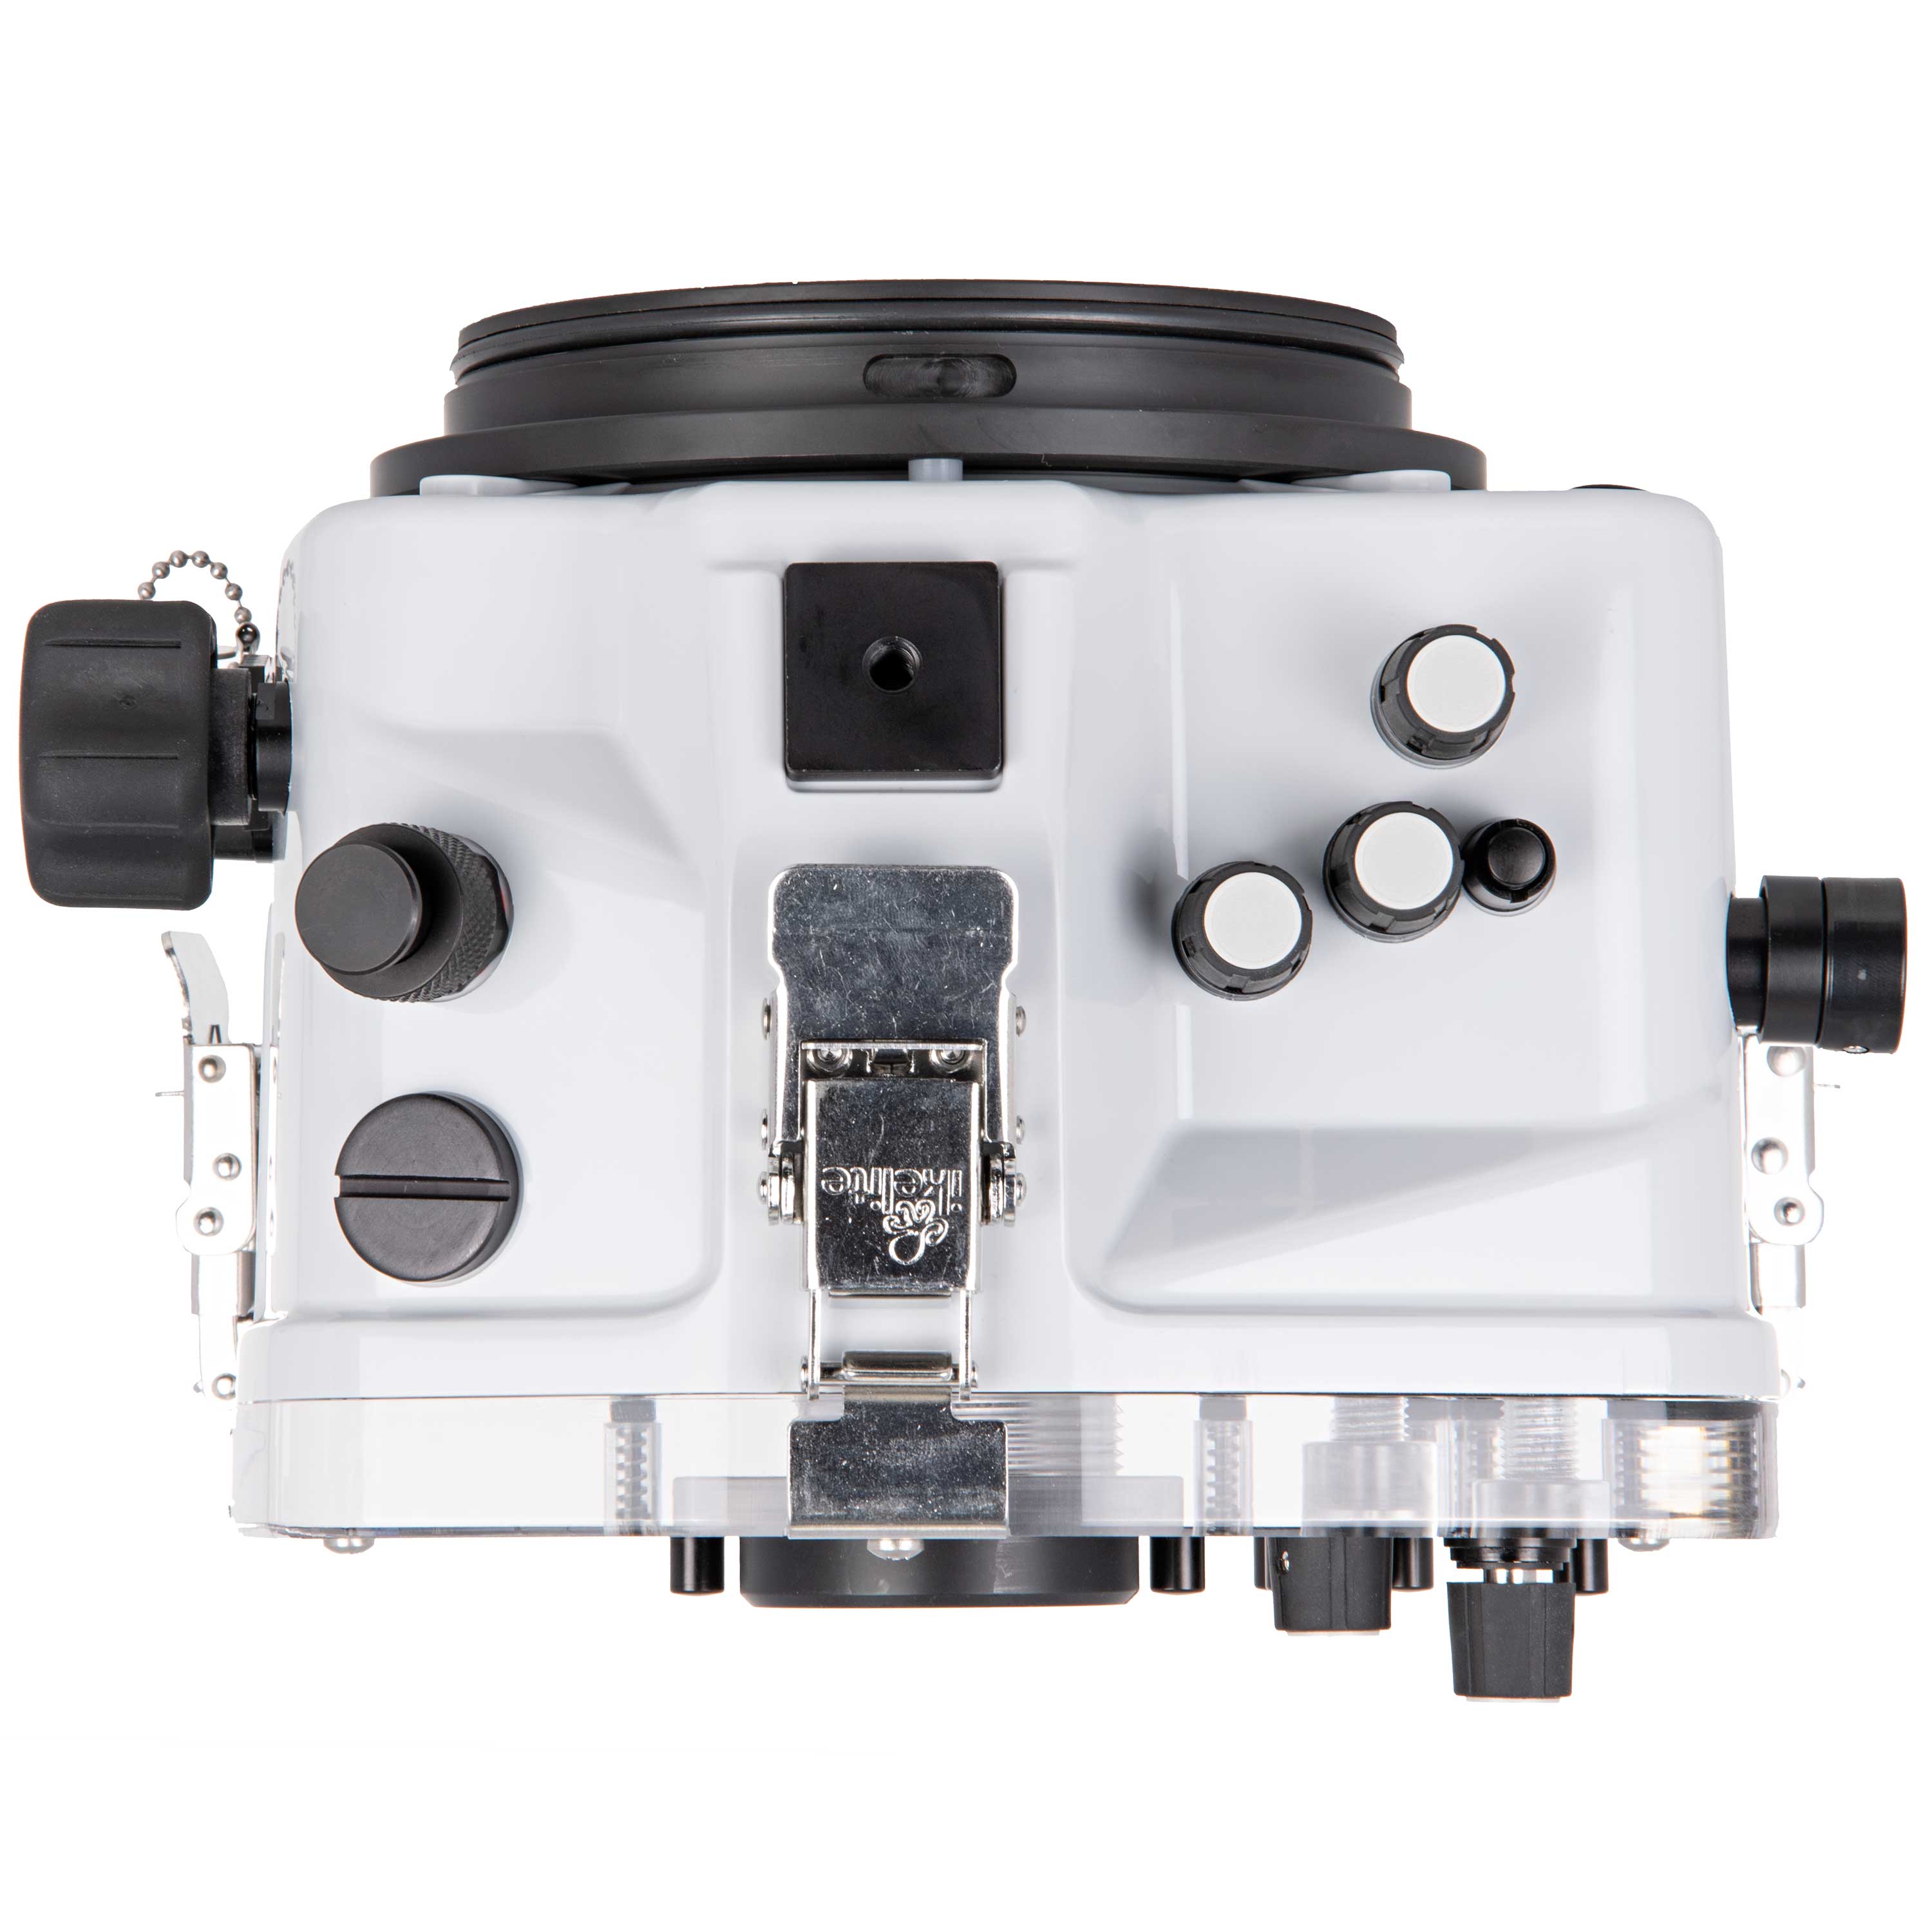 Ikelite Underwater Housing for Sony Alpha A7, A7R, A7S Mirrorless Cameras